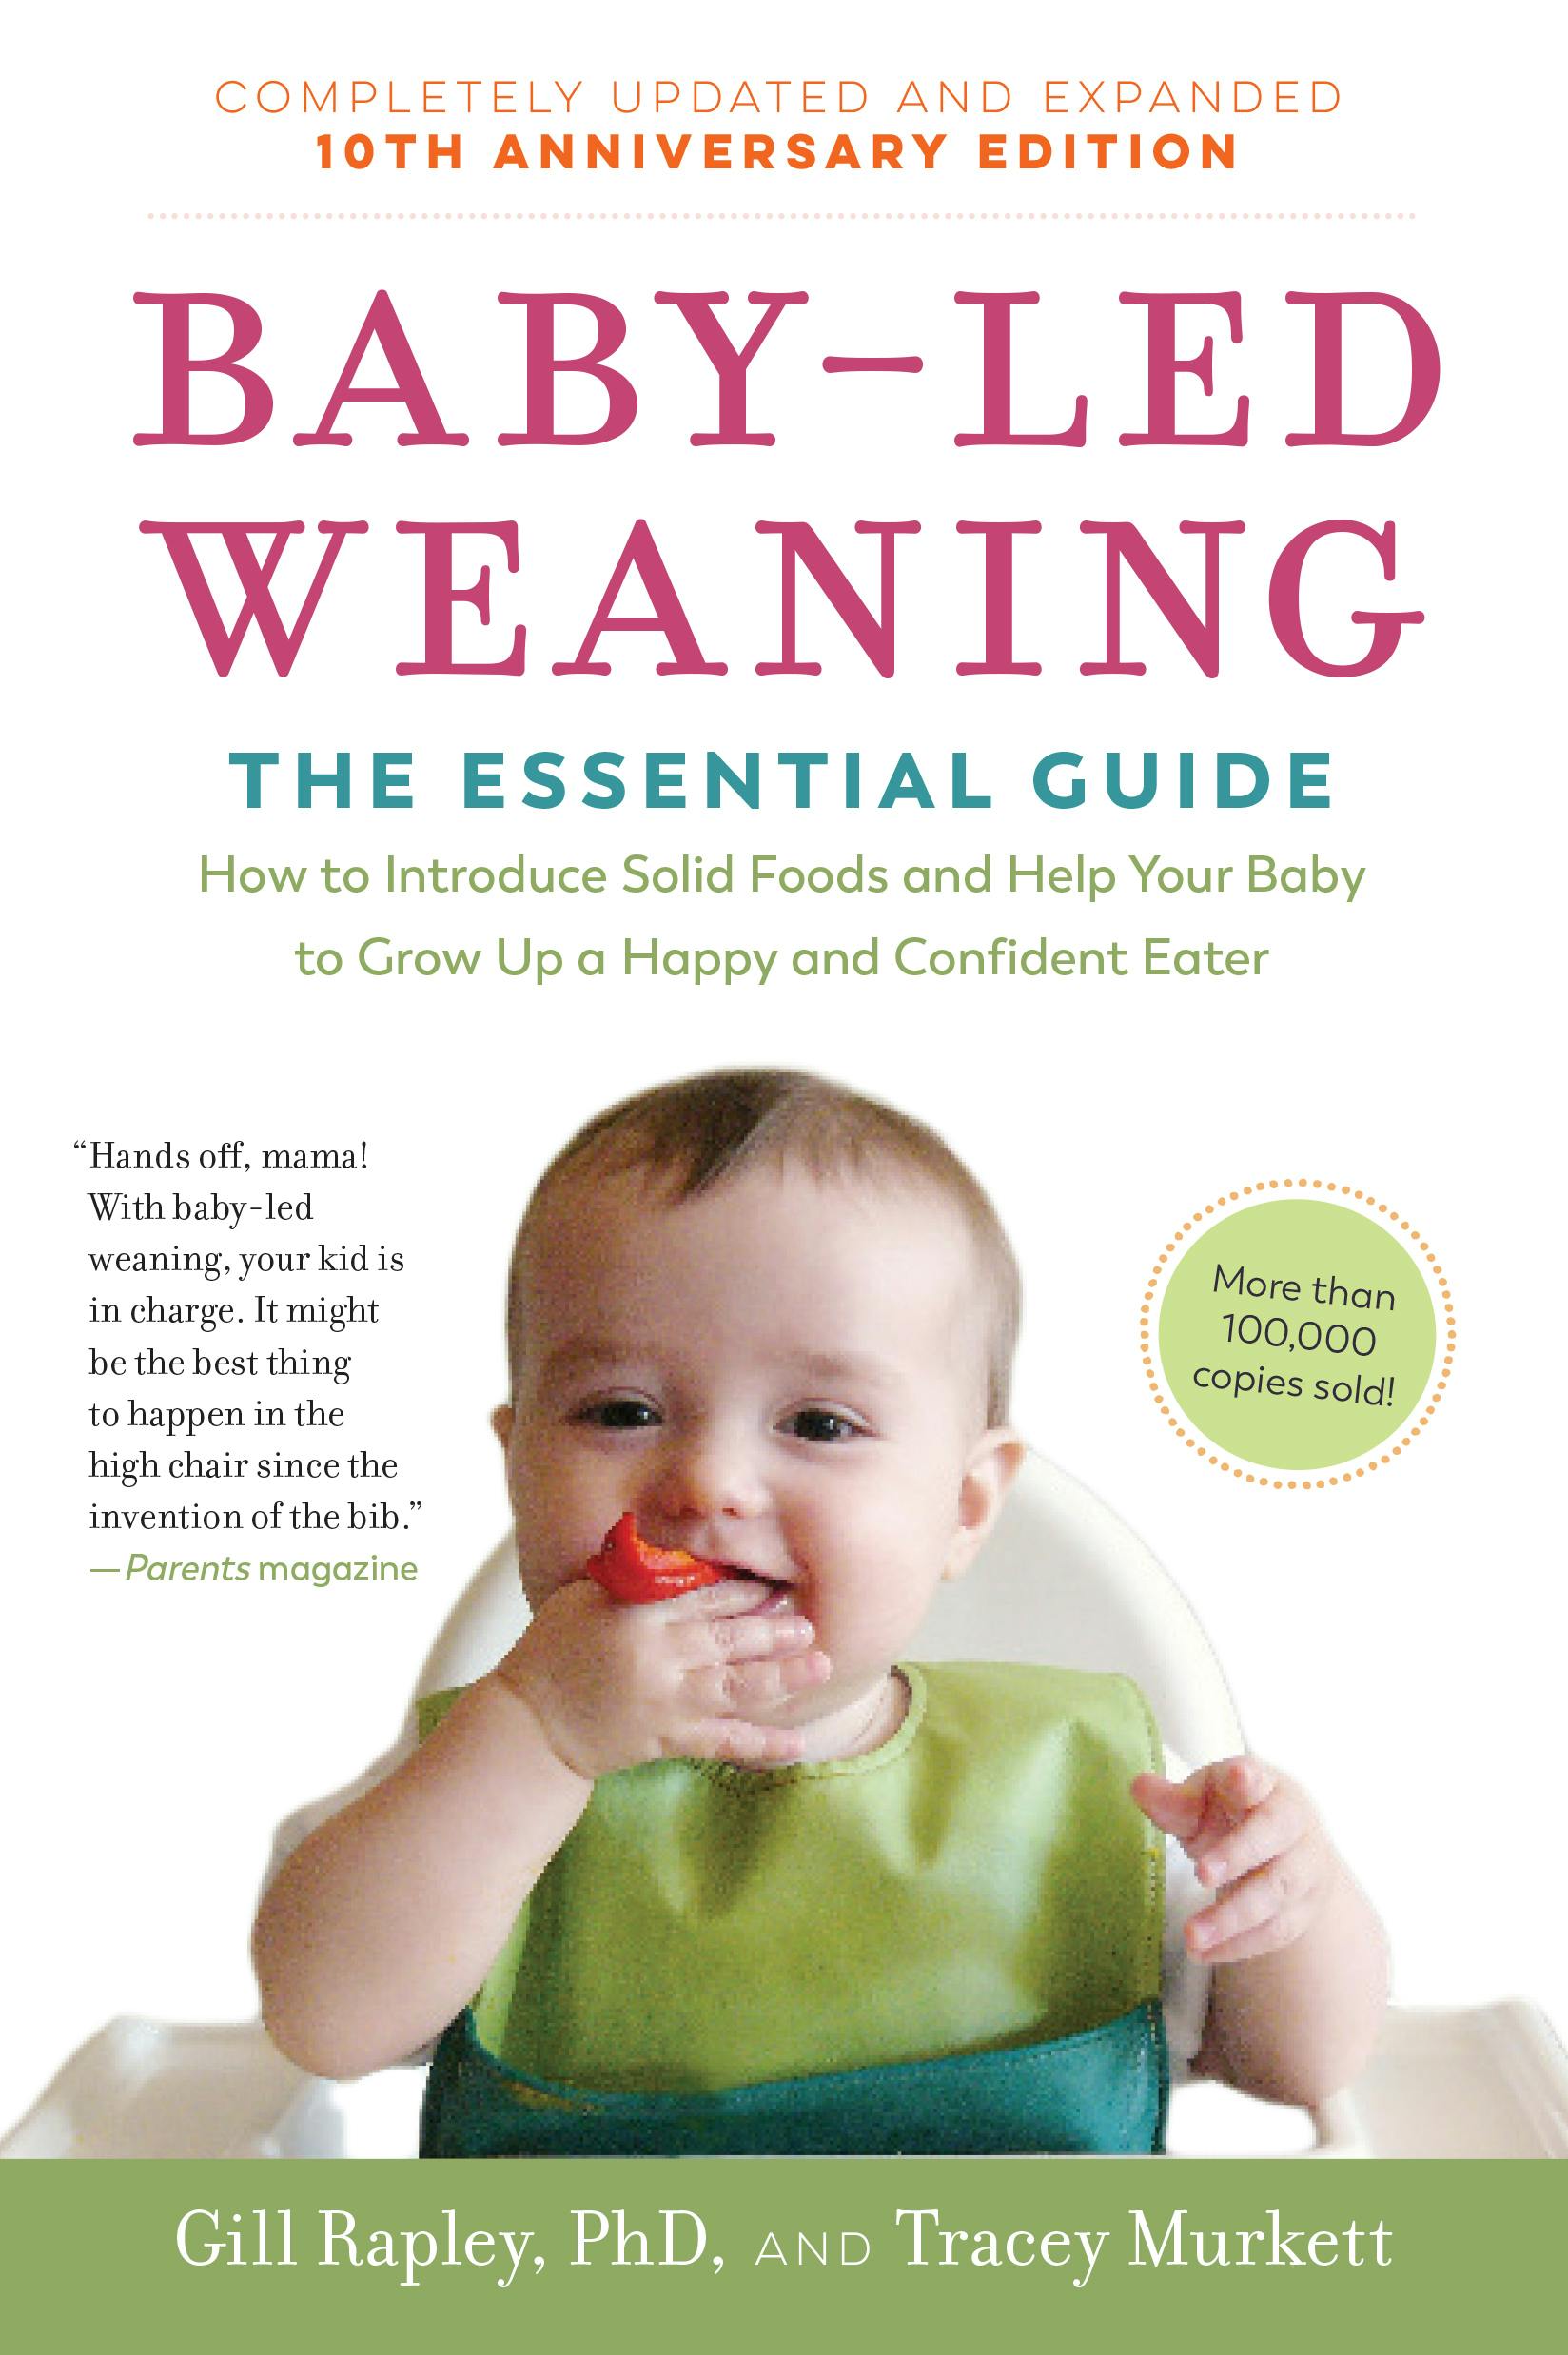 Photograph of the cover of the original baby-led weaning book co-authored by Gill Rapley. It is the revised 10th anniversary edition with photograph of baby on the cover bringing a strawberry to his mouth using his right hand.